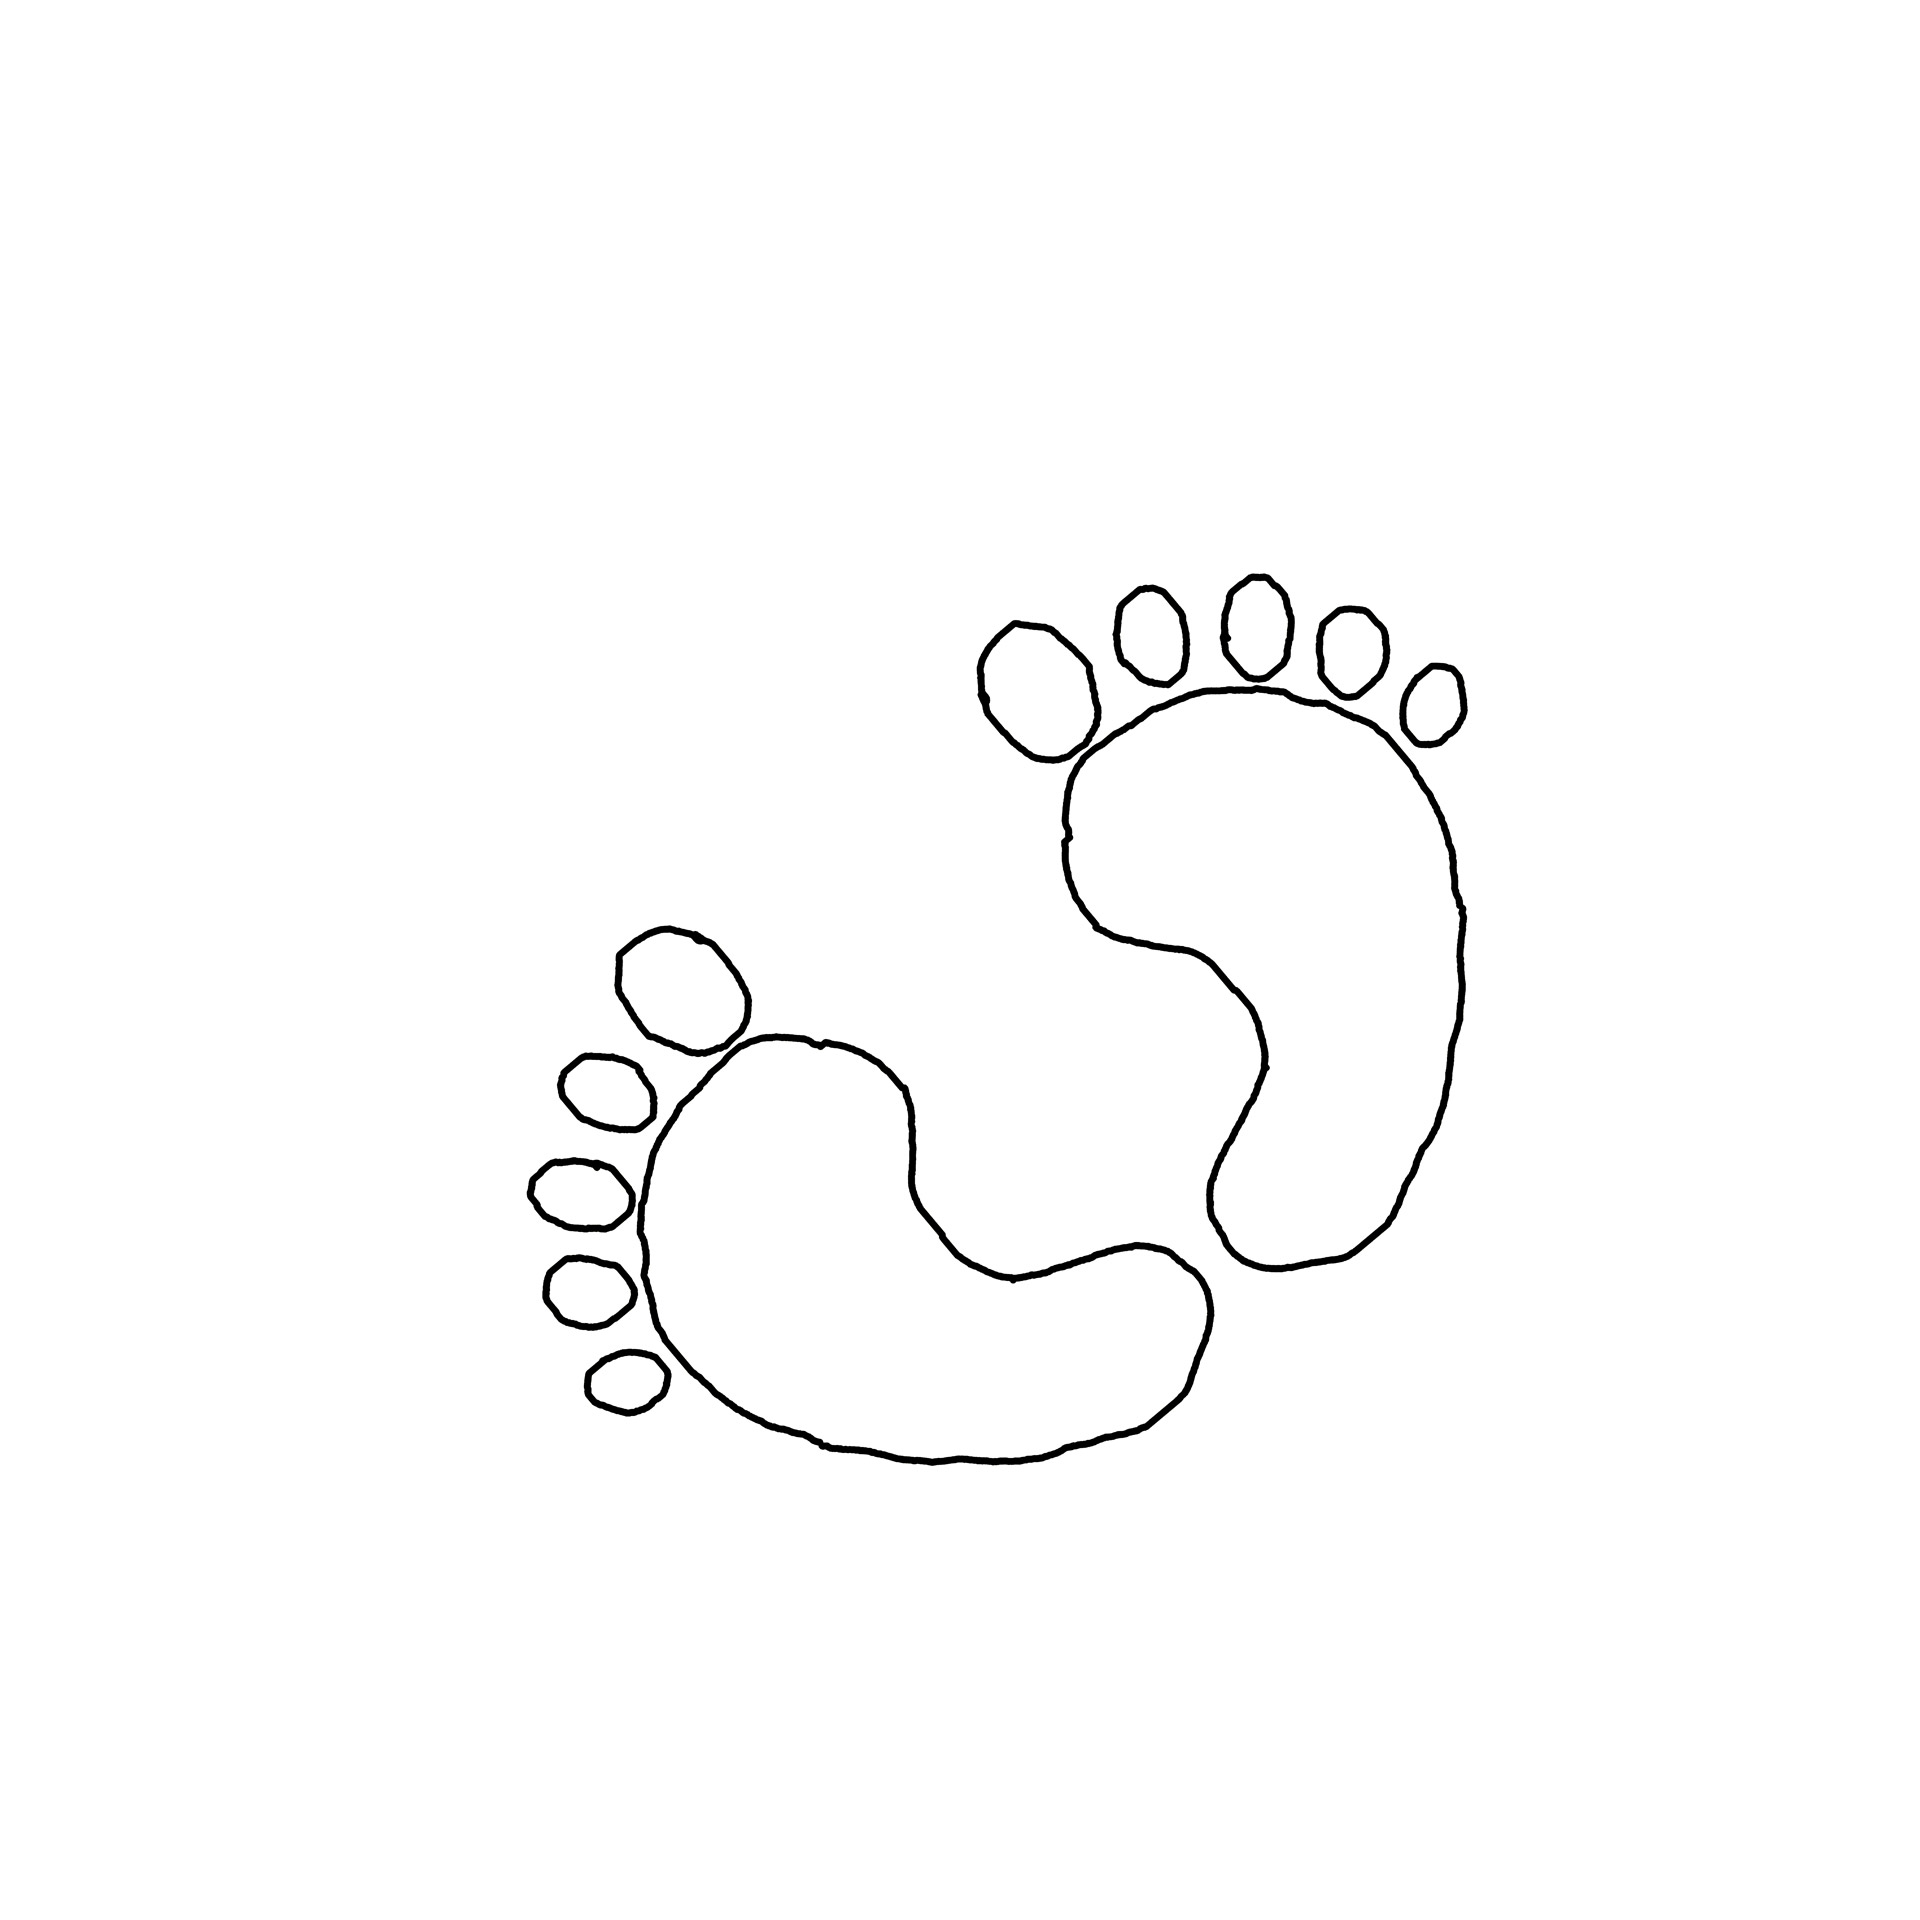 black-human-footprint-outline-isolated-free-image-from-needpix